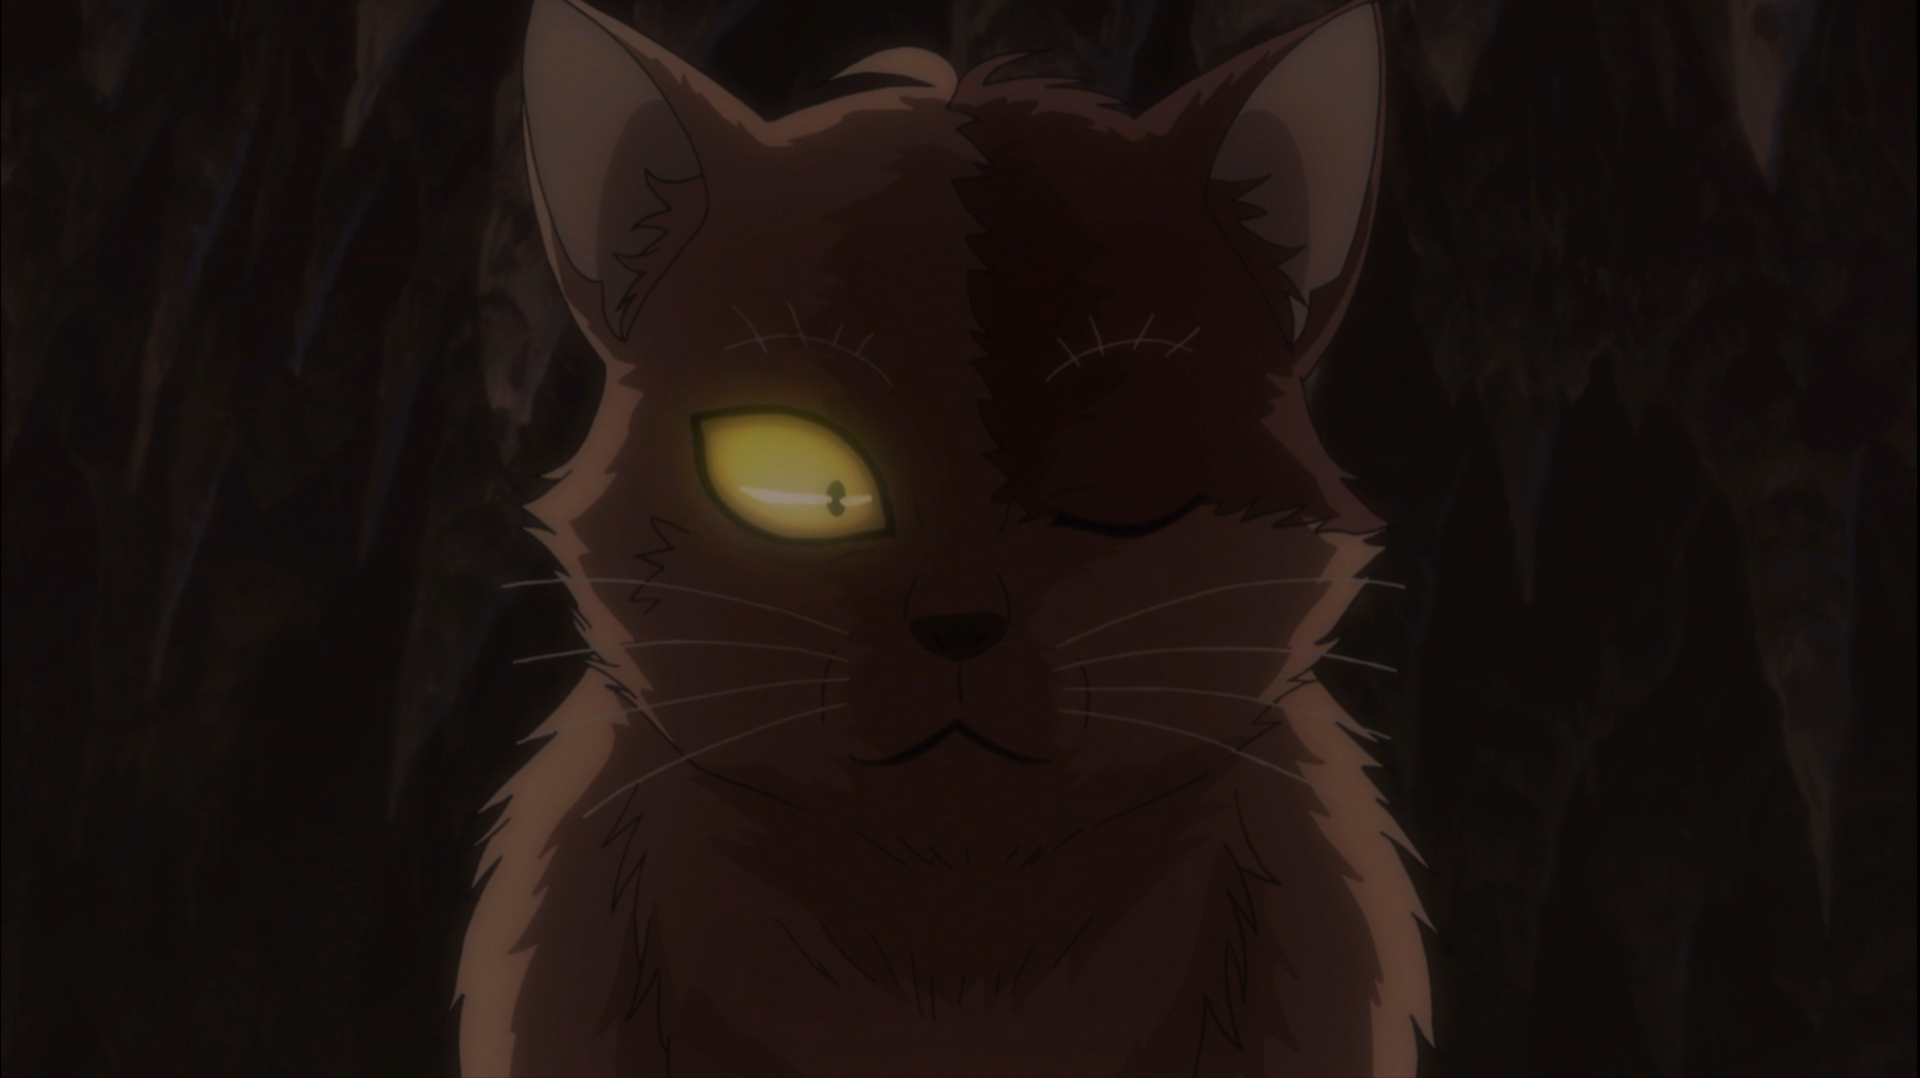 GeGeGe no Kitaro has been turned into a cat.